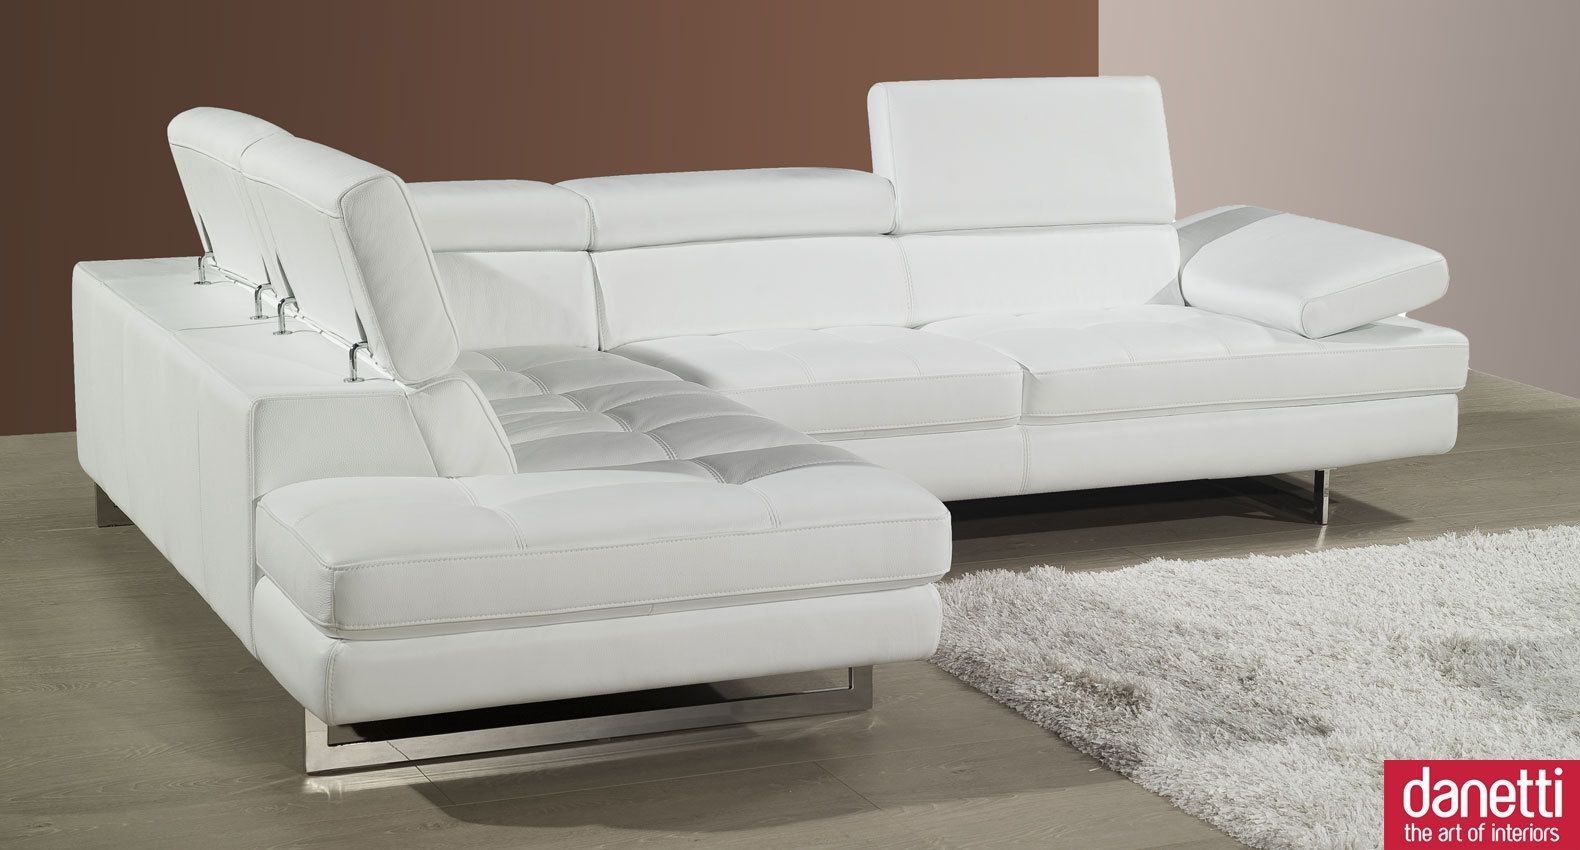 Modern White Leather Couchimage Gallery | Image Gallery | Idi Design In White Leather Corner Sofas (View 7 of 10)